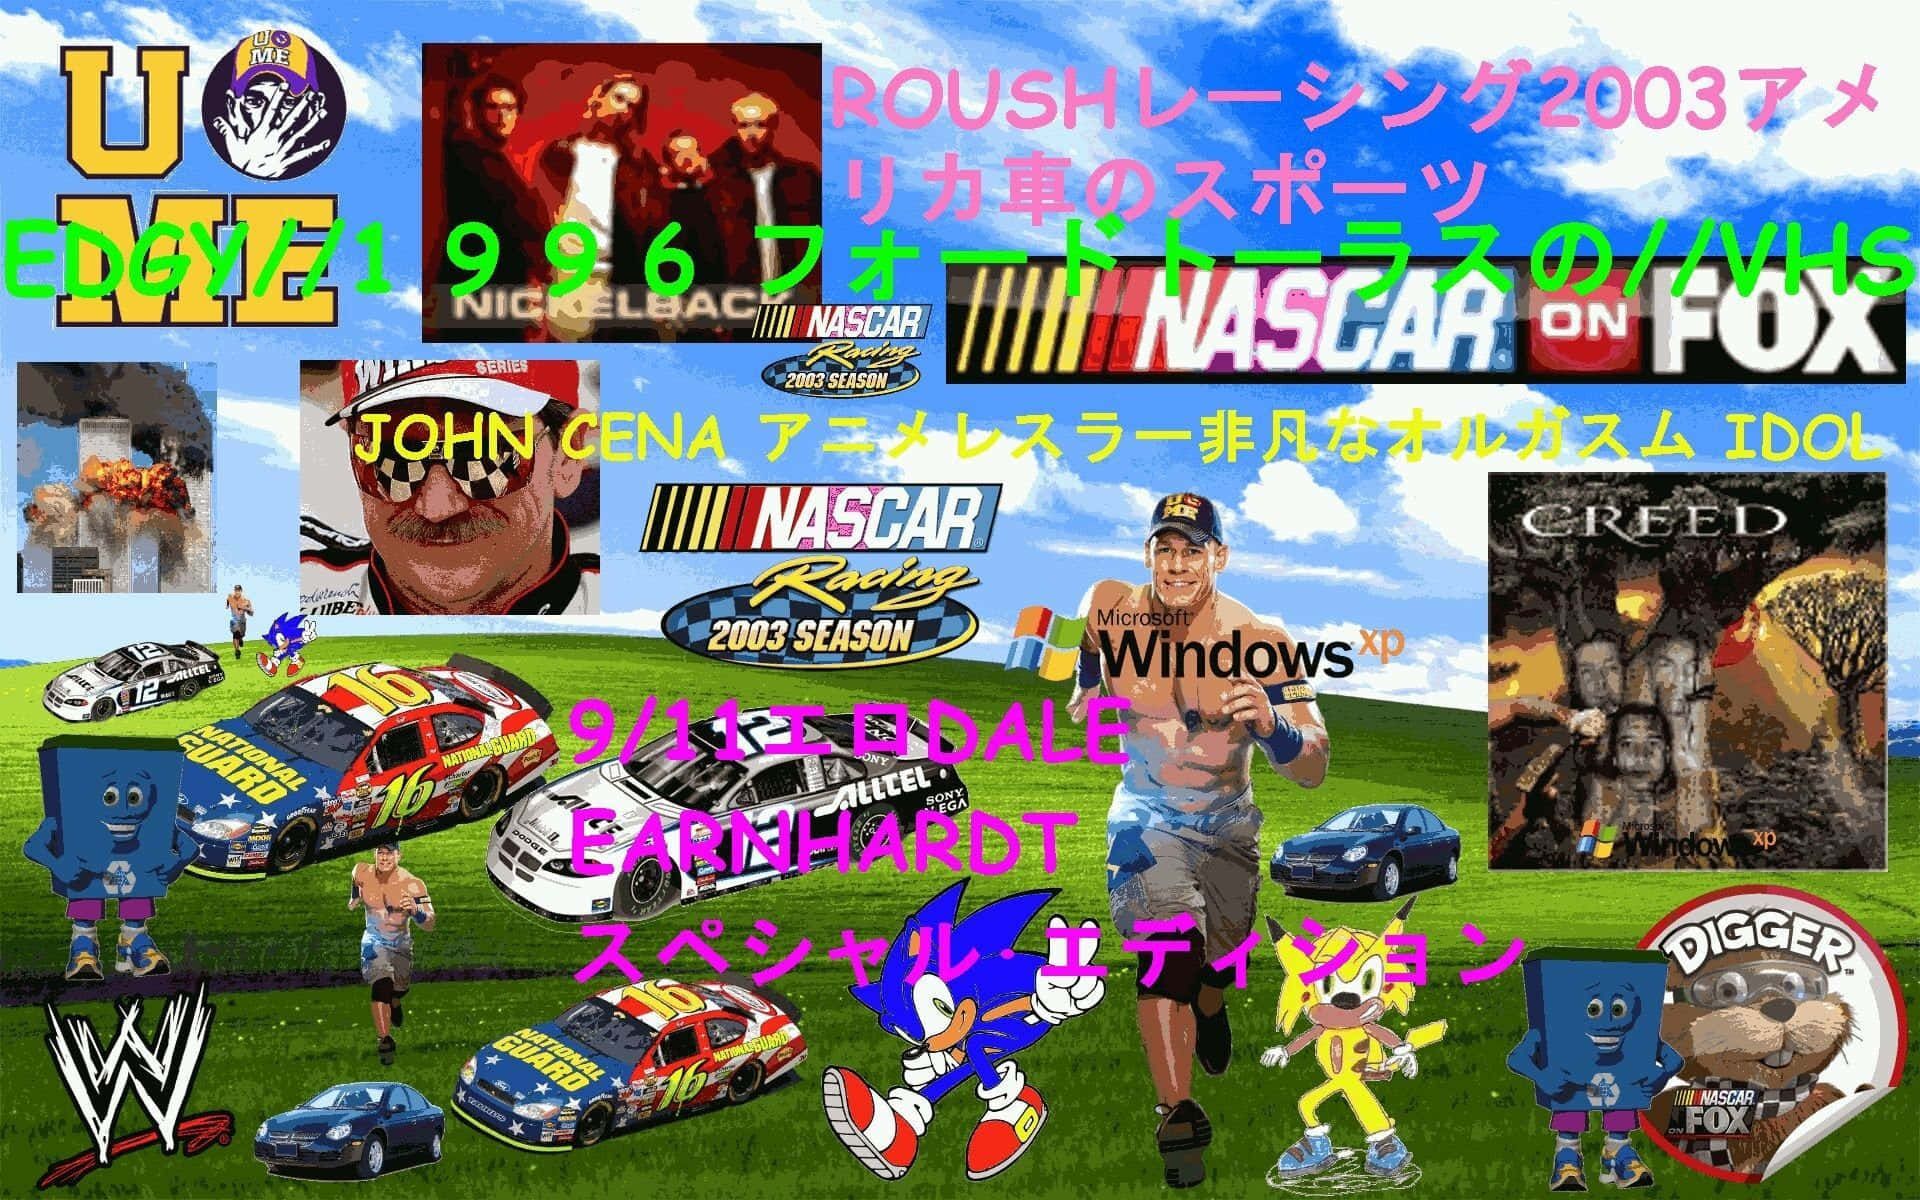 A collage of images including a wrestler, cars, and a fox. - 2000s